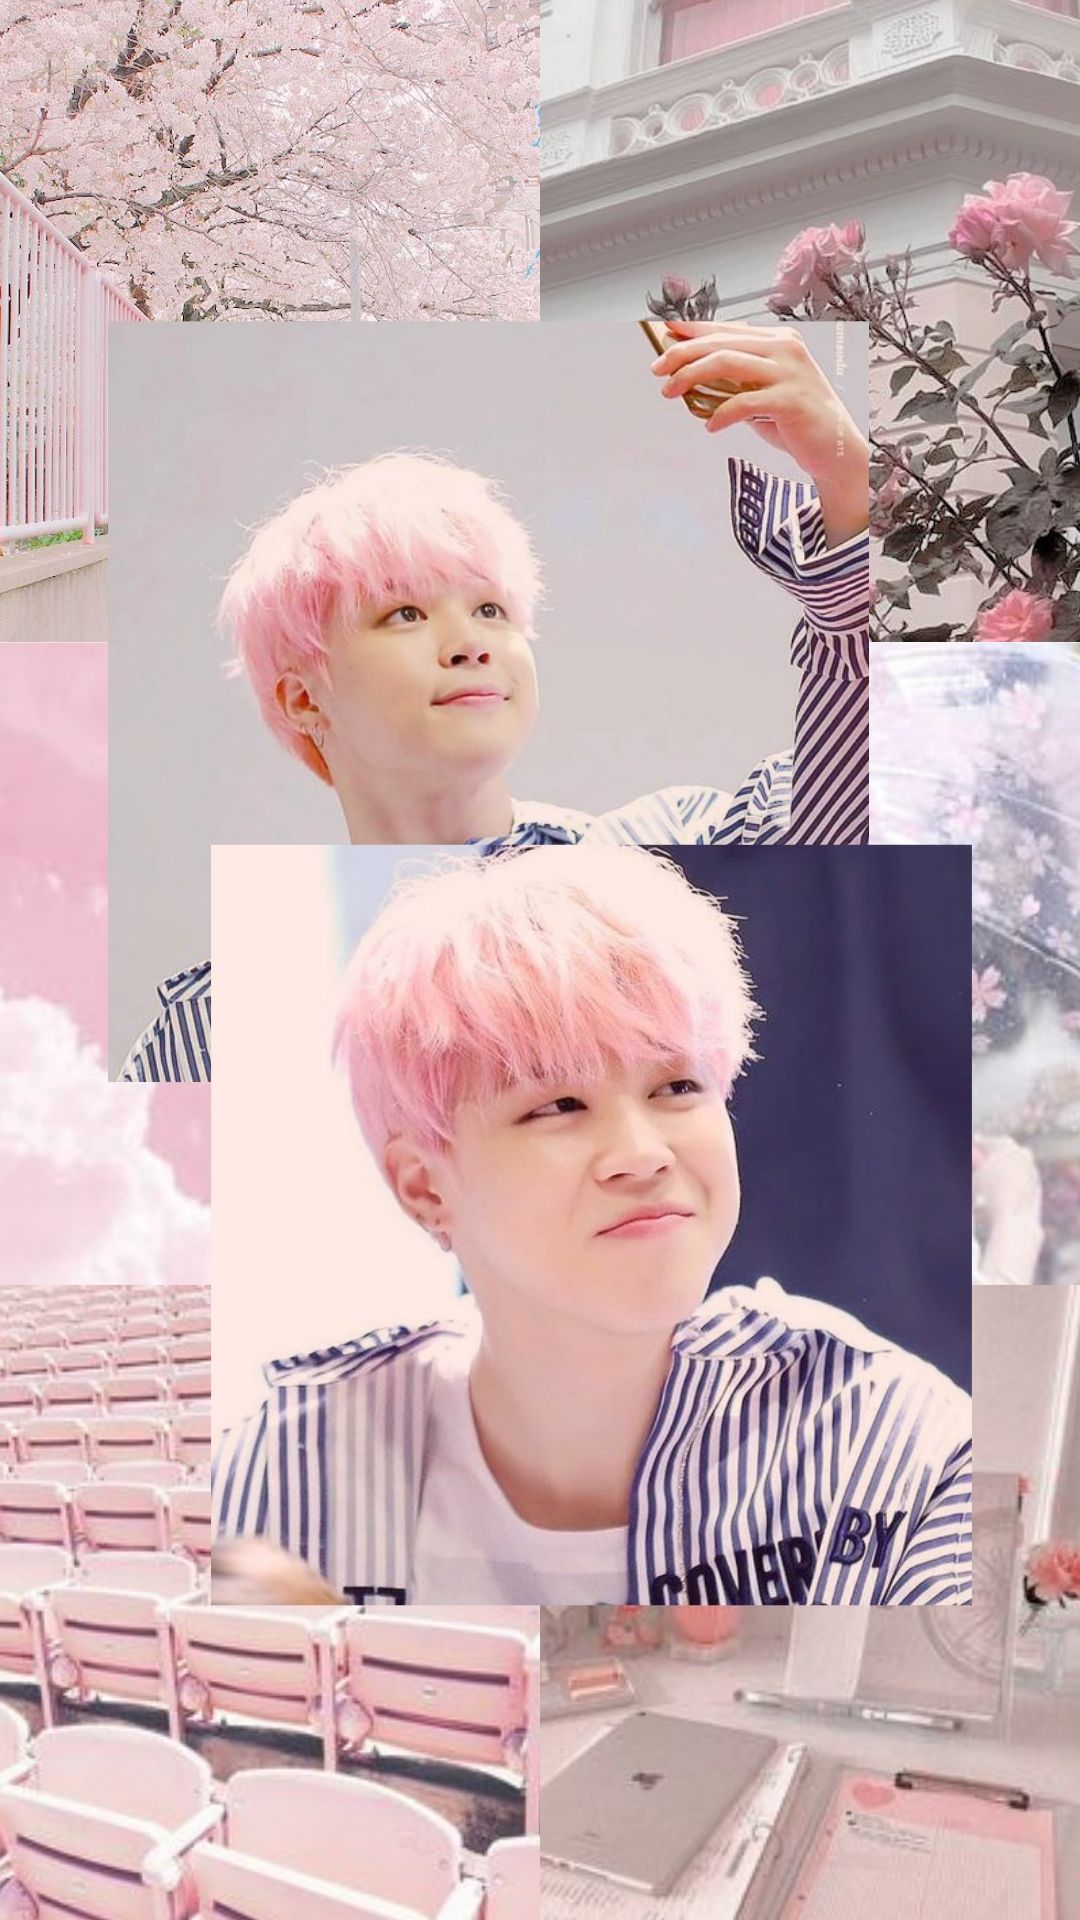 I made a wallpaper of Jimin from BTS! I hope you like it! - Jimin